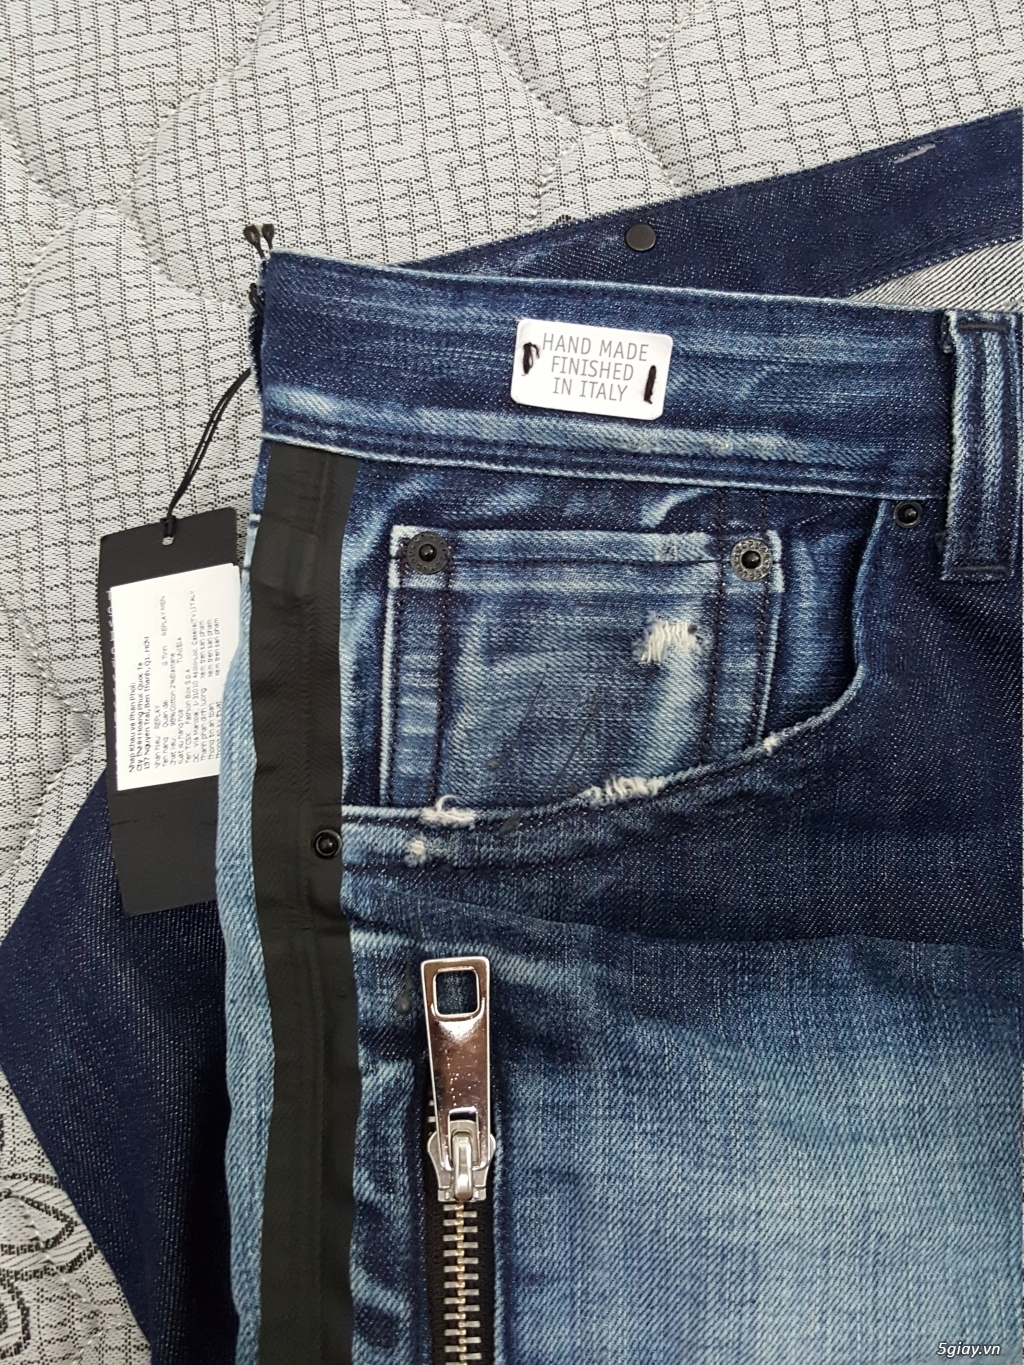 Jeans REPLAY Lonham size 31 - New full tags ! - 5